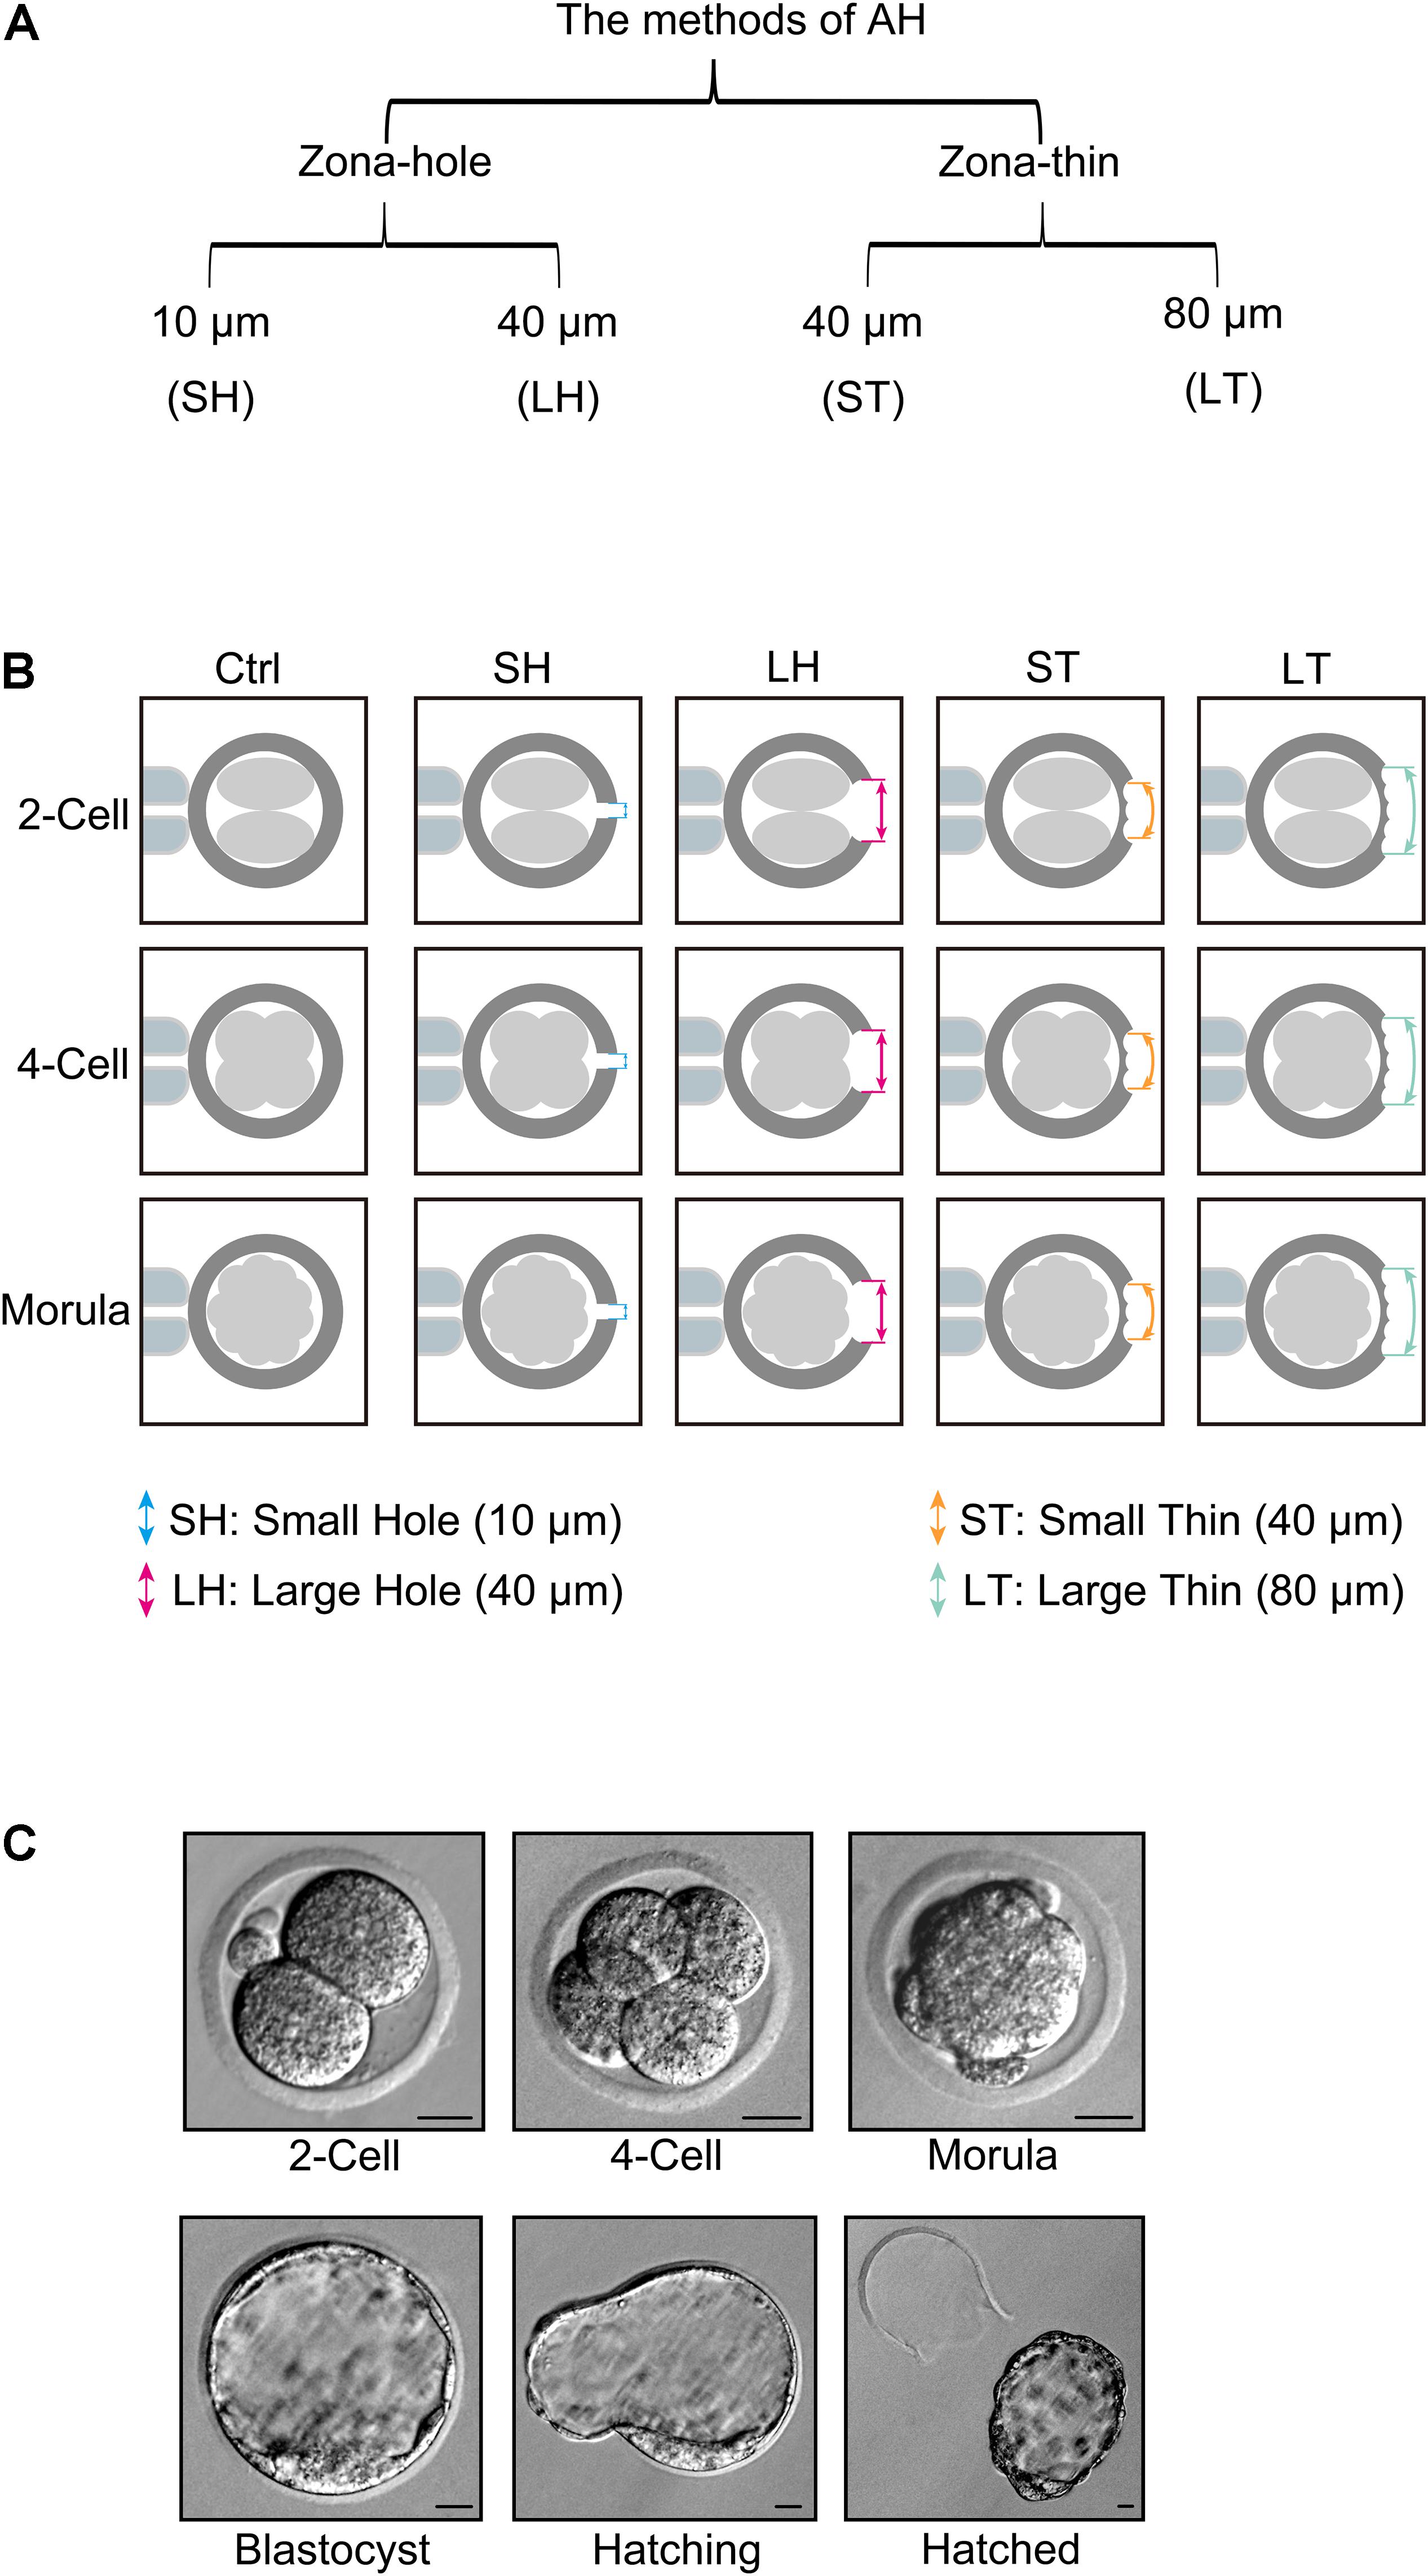 Frontiers | Assisted Hatching Treatment Piezo-Mediated Small Hole on Zona Pellucida Morula Stage Embryos Improves Implantation and Litter Size in Mice